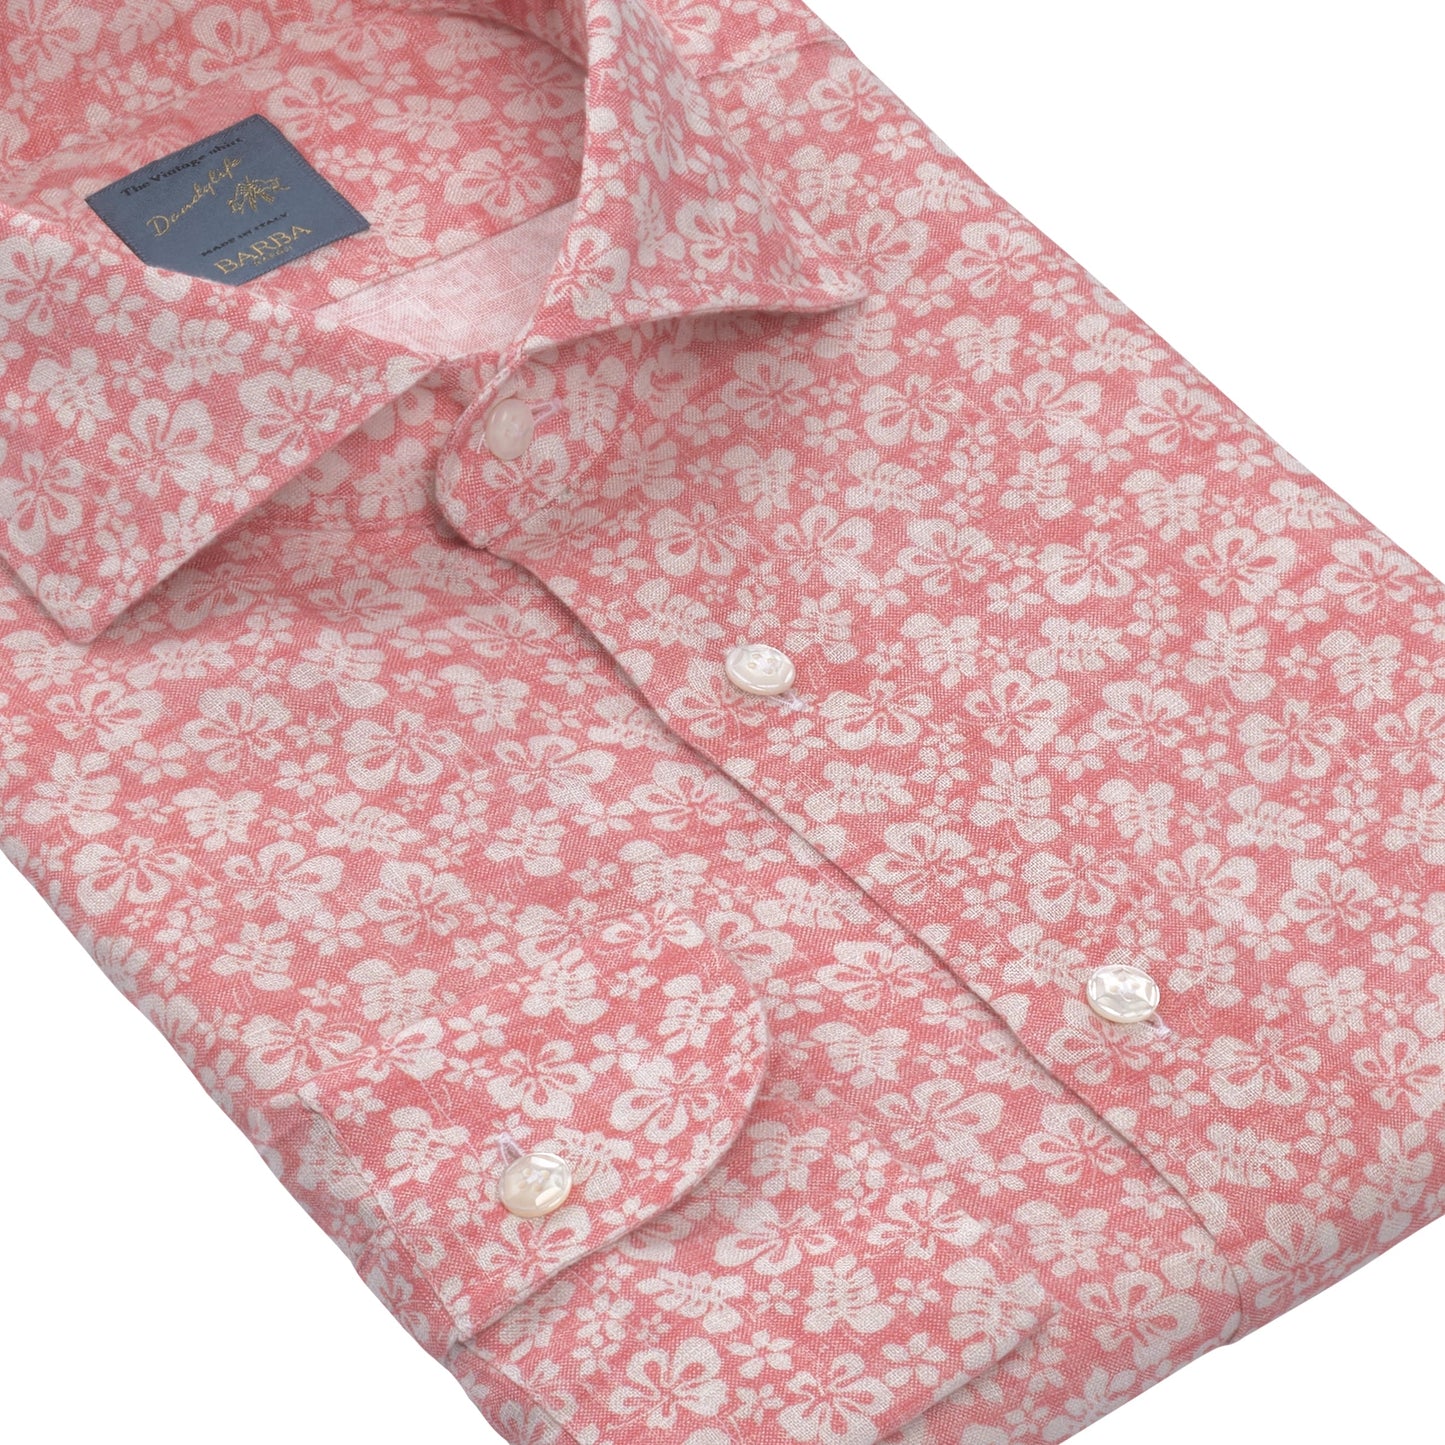 Barba Napoli Linen Shirt with Floral Print in Pink and White - SARTALE